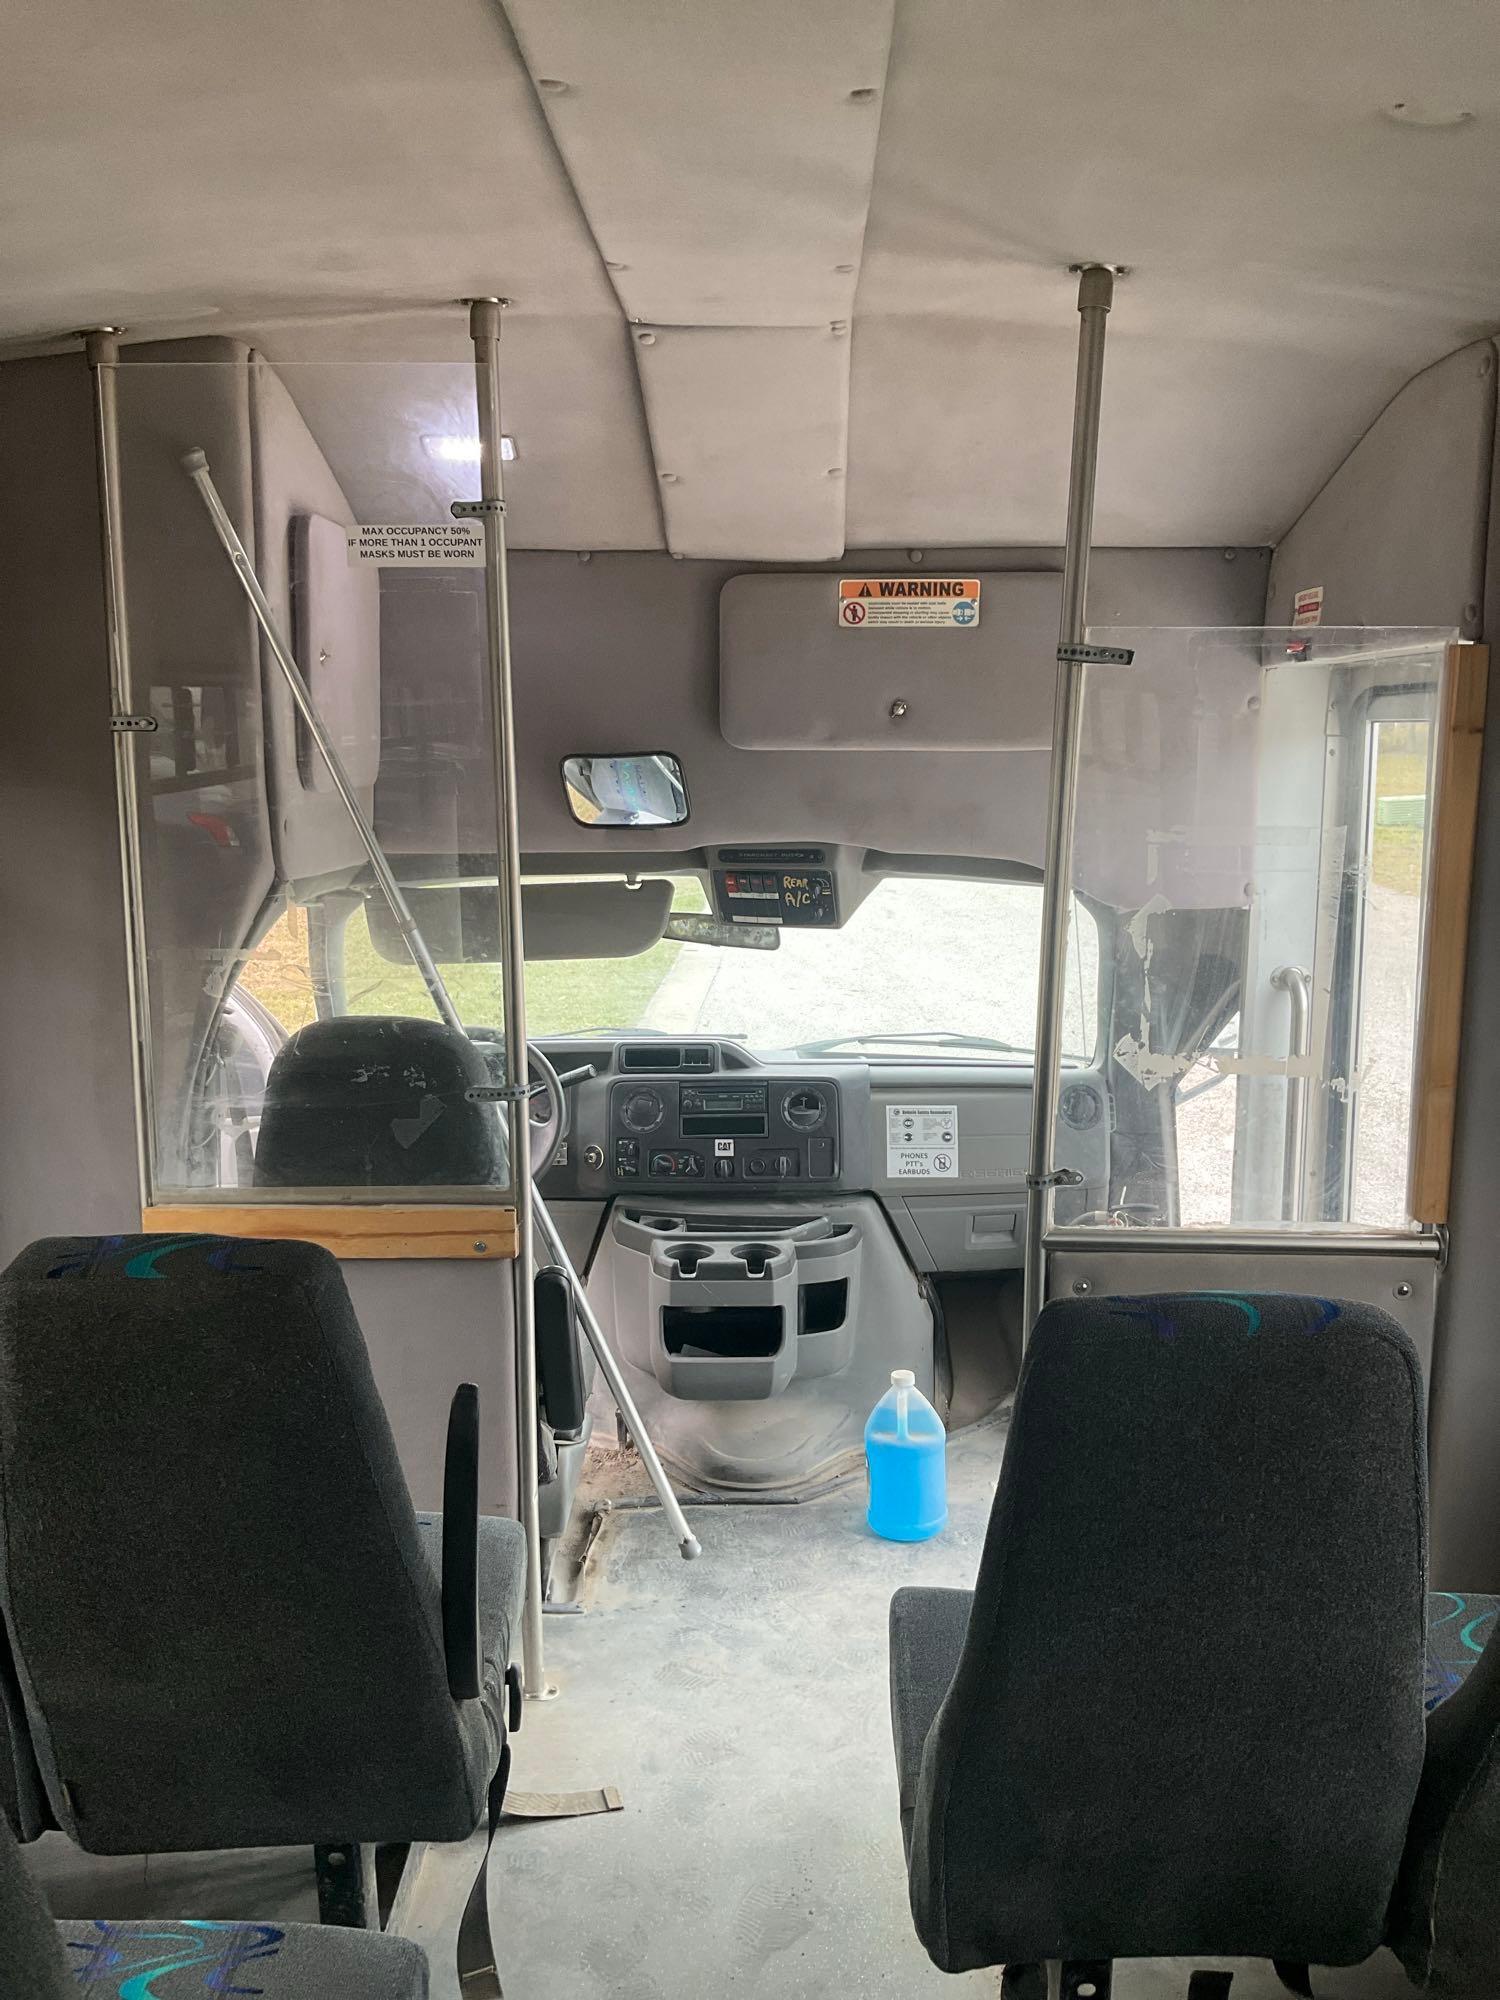 2018 FORD ECONOLINE 450 SHUTTLE BUS, GAS AUTOMATIC, 28 PASSENGER SEATING, APPROX 14500 GVWR,